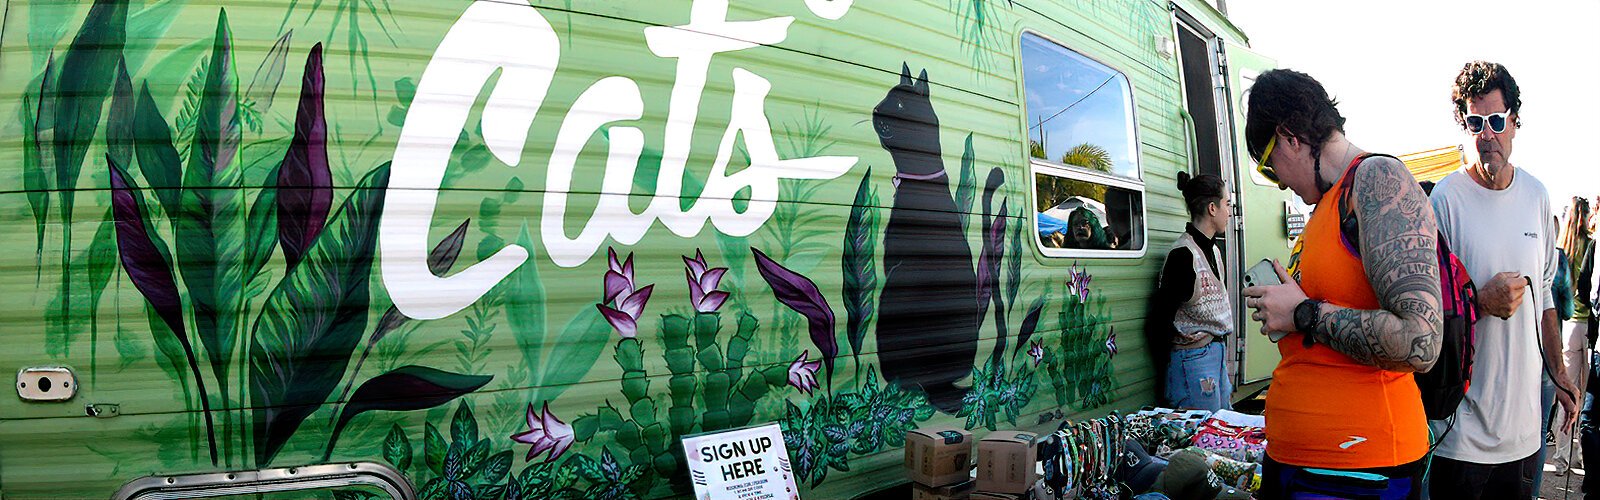 For a minimal fee at the Botany Cats mobile cat lounge, cat lovers can sign up for fifteen minutes of cuddling with a bunch of lively kittens – and maybe end up adopting one.